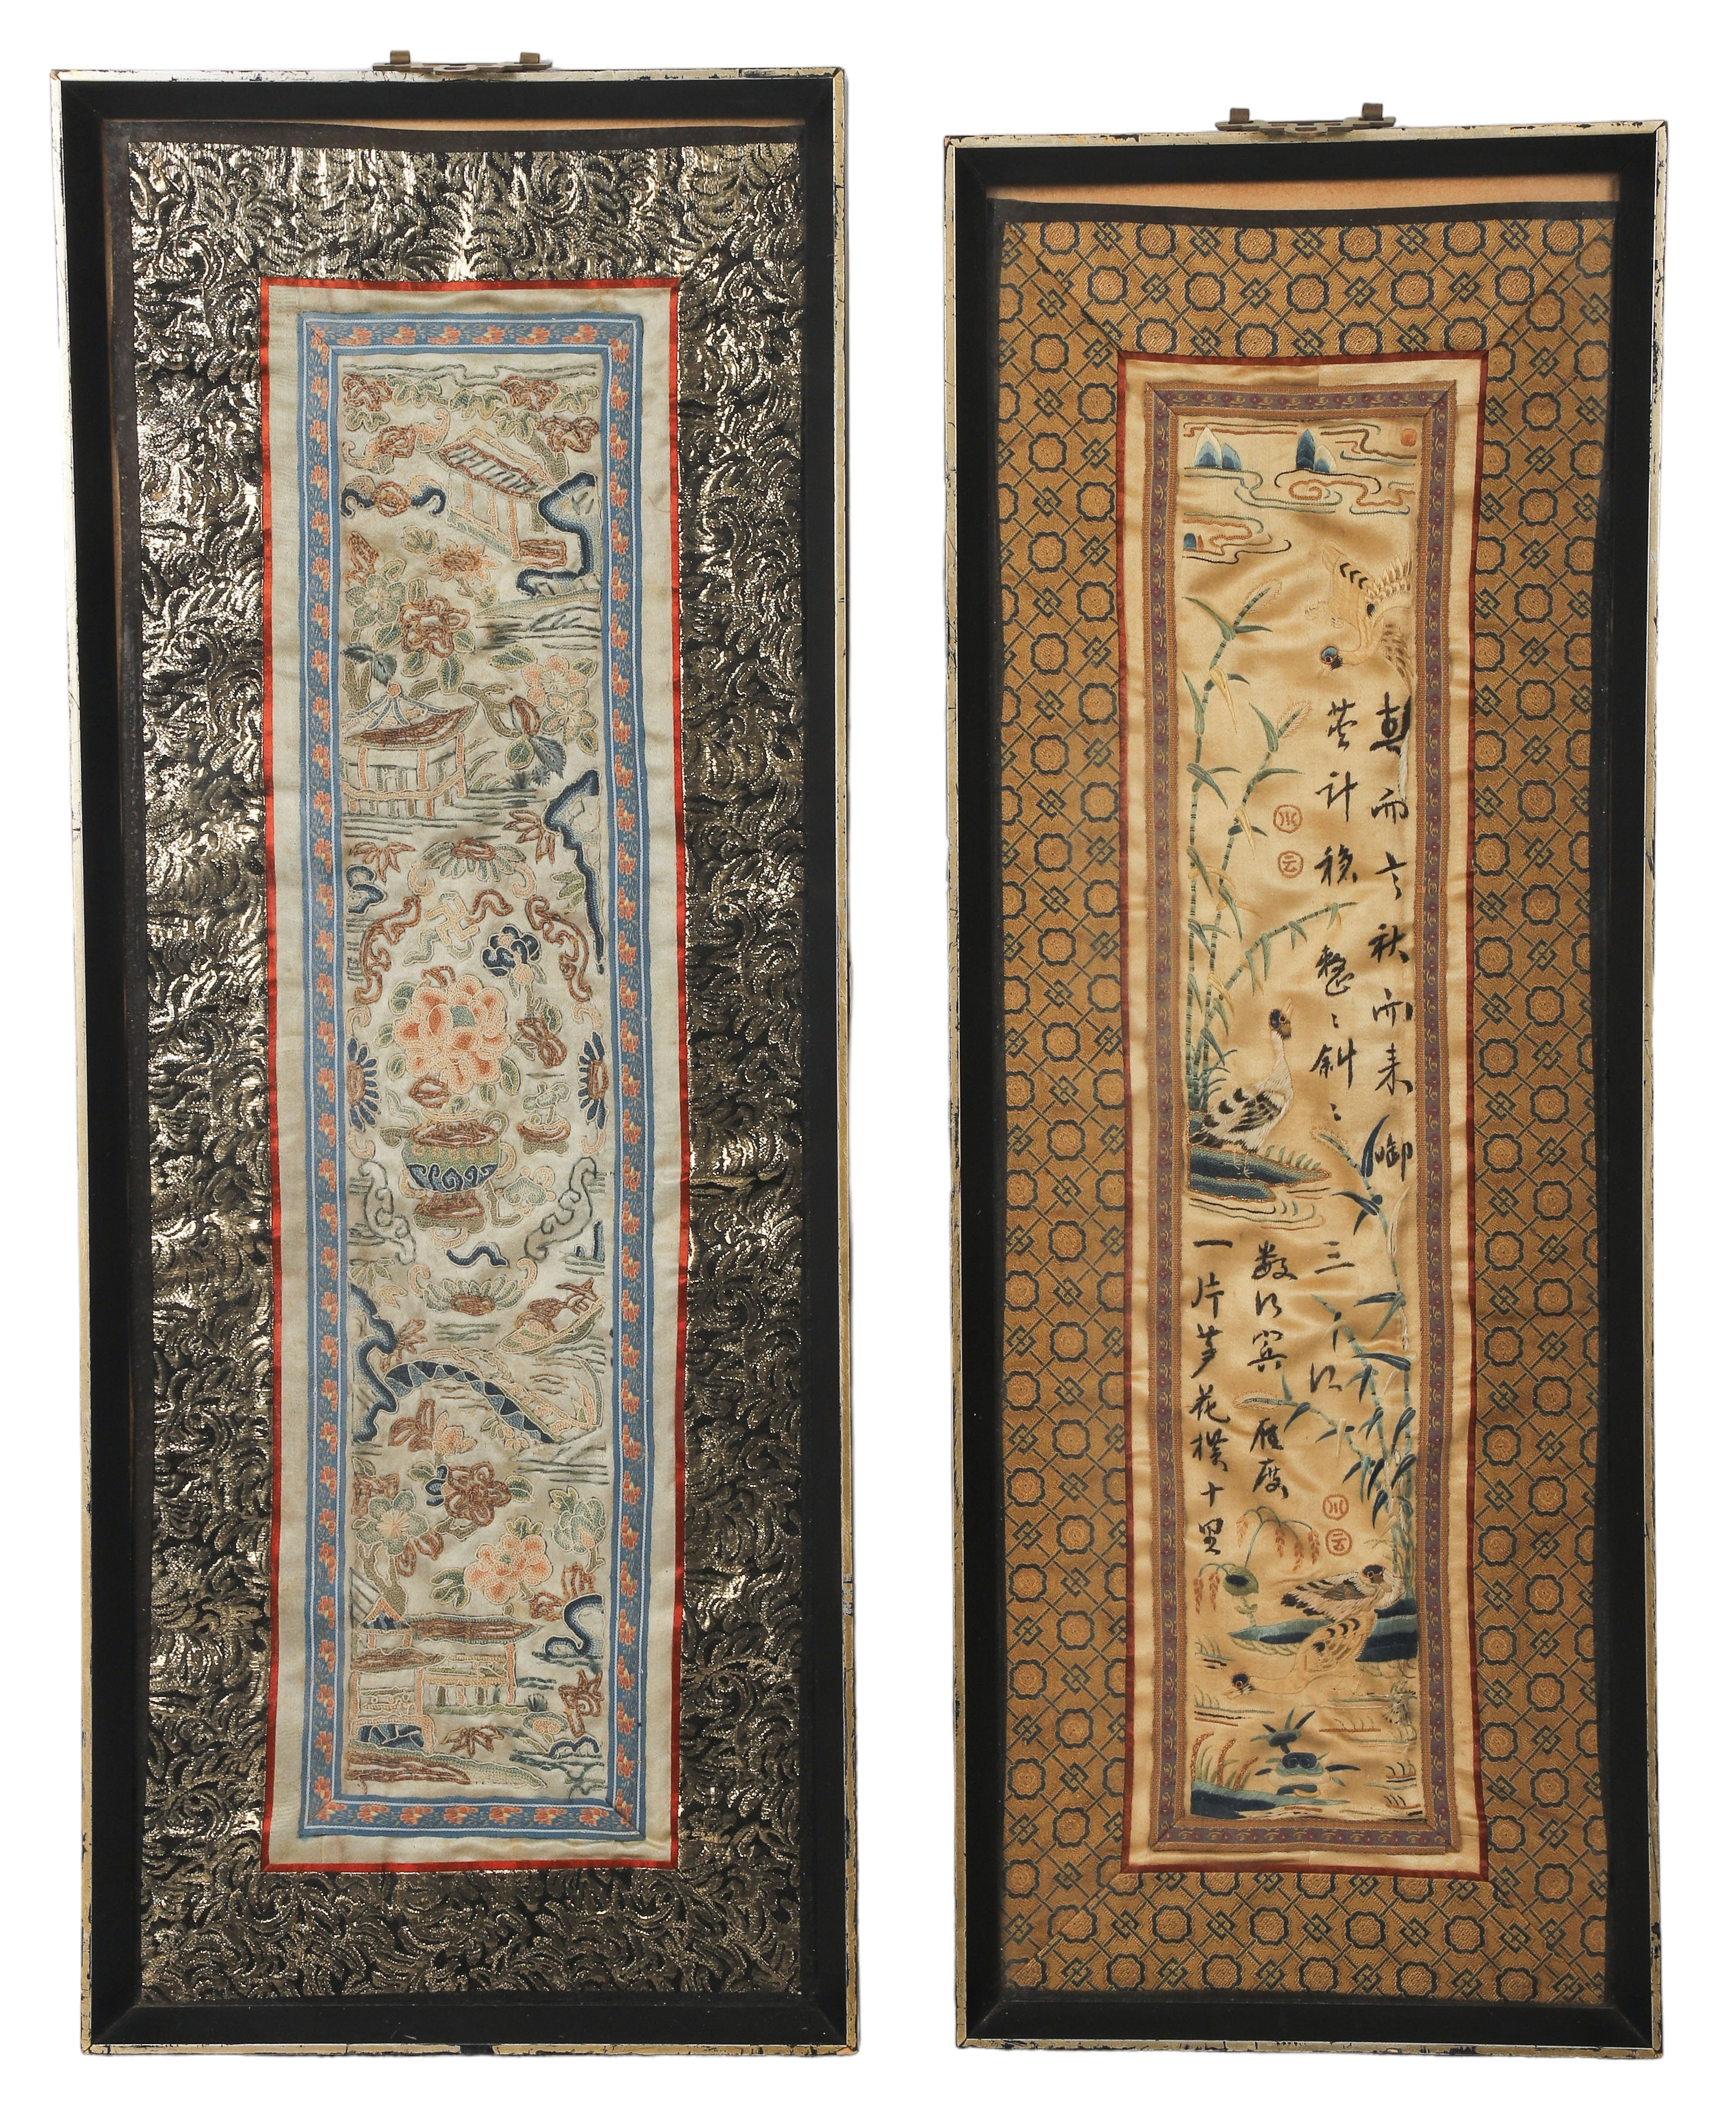  2 Chinese silk embroideries  2e24be